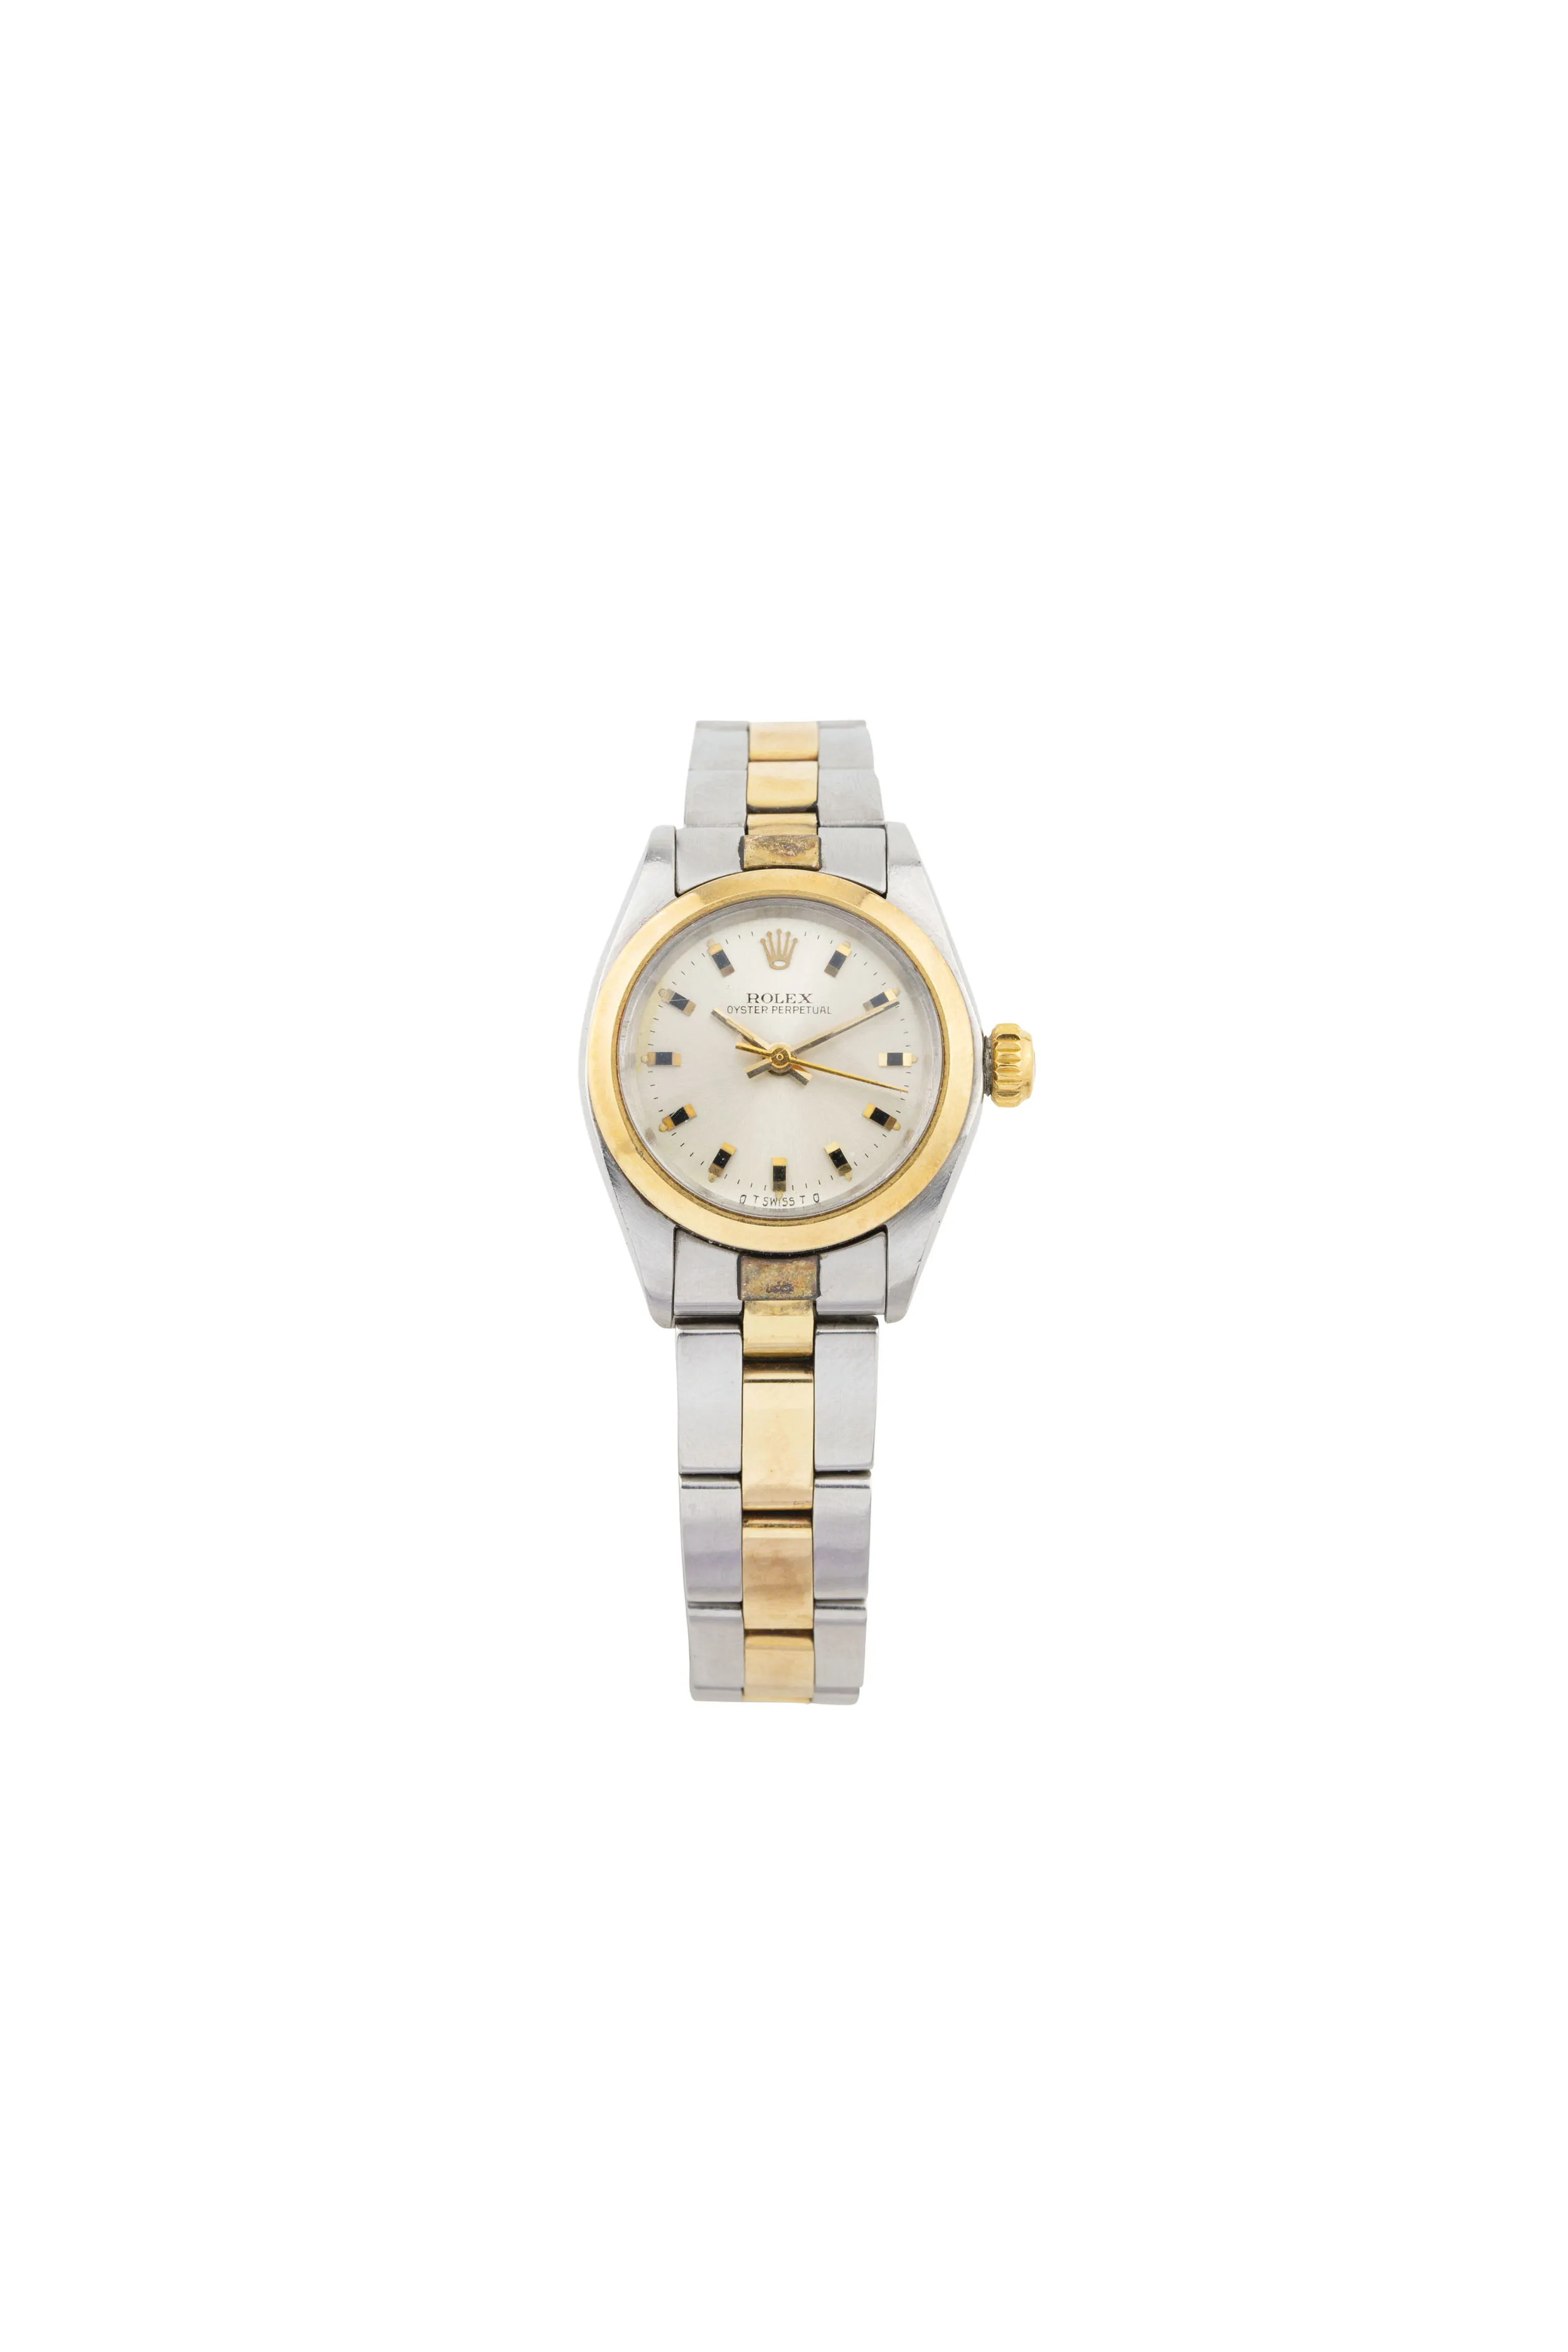 Rolex Oyster Perpetual 6718 25mm Stainless steel and gold